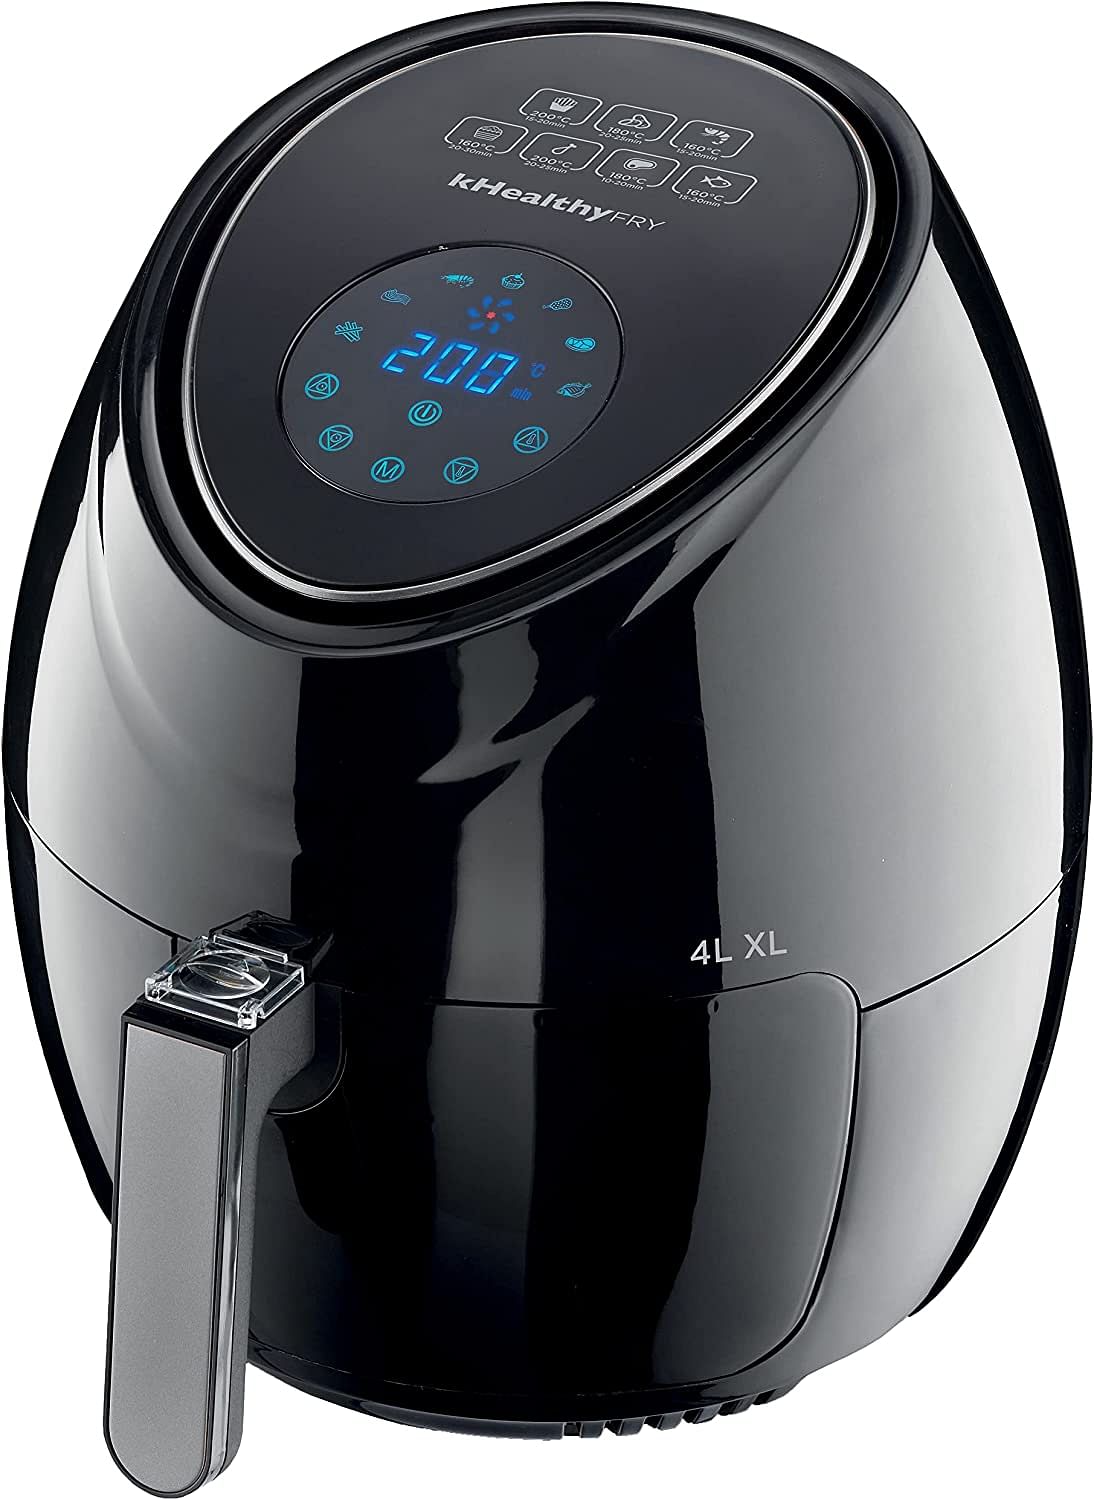 Kenwood Digital Air Fryer XL 4.0L 1.8KG 1500W | Air Fryer with Rapid Hot Air Circulation | Air Fryer for Frying, Grilling, Broiling, Roasting, Baking and Toasting HFP31.000BK Black